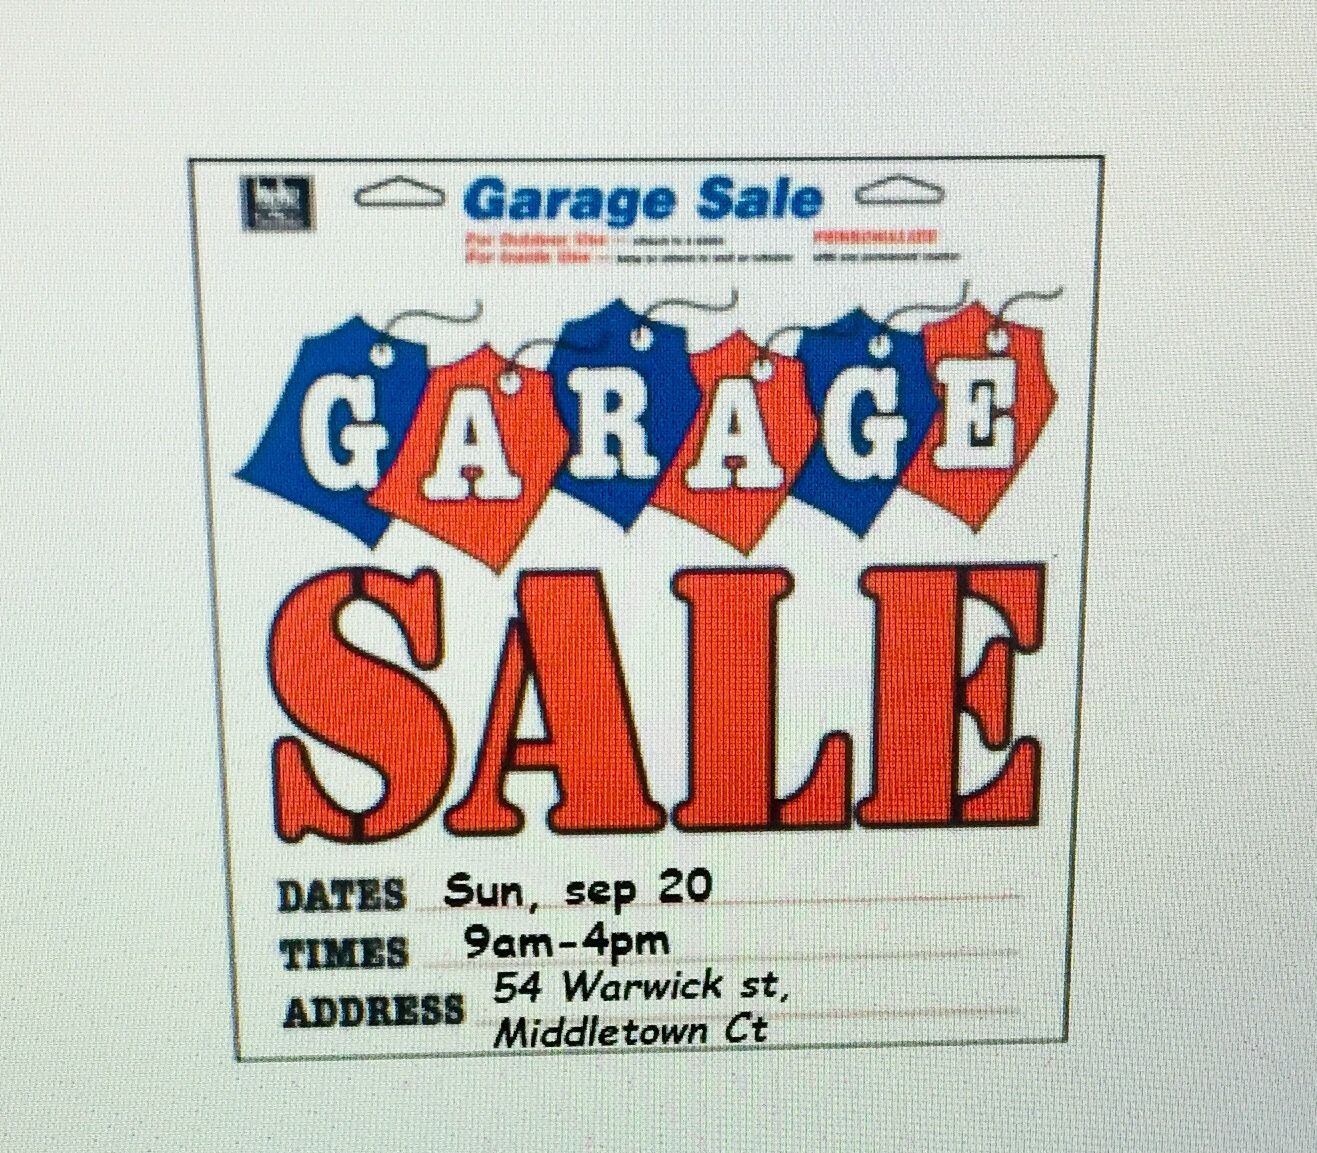 Tag sale from 9am-4pm at 54 Warwick st Middletown ct